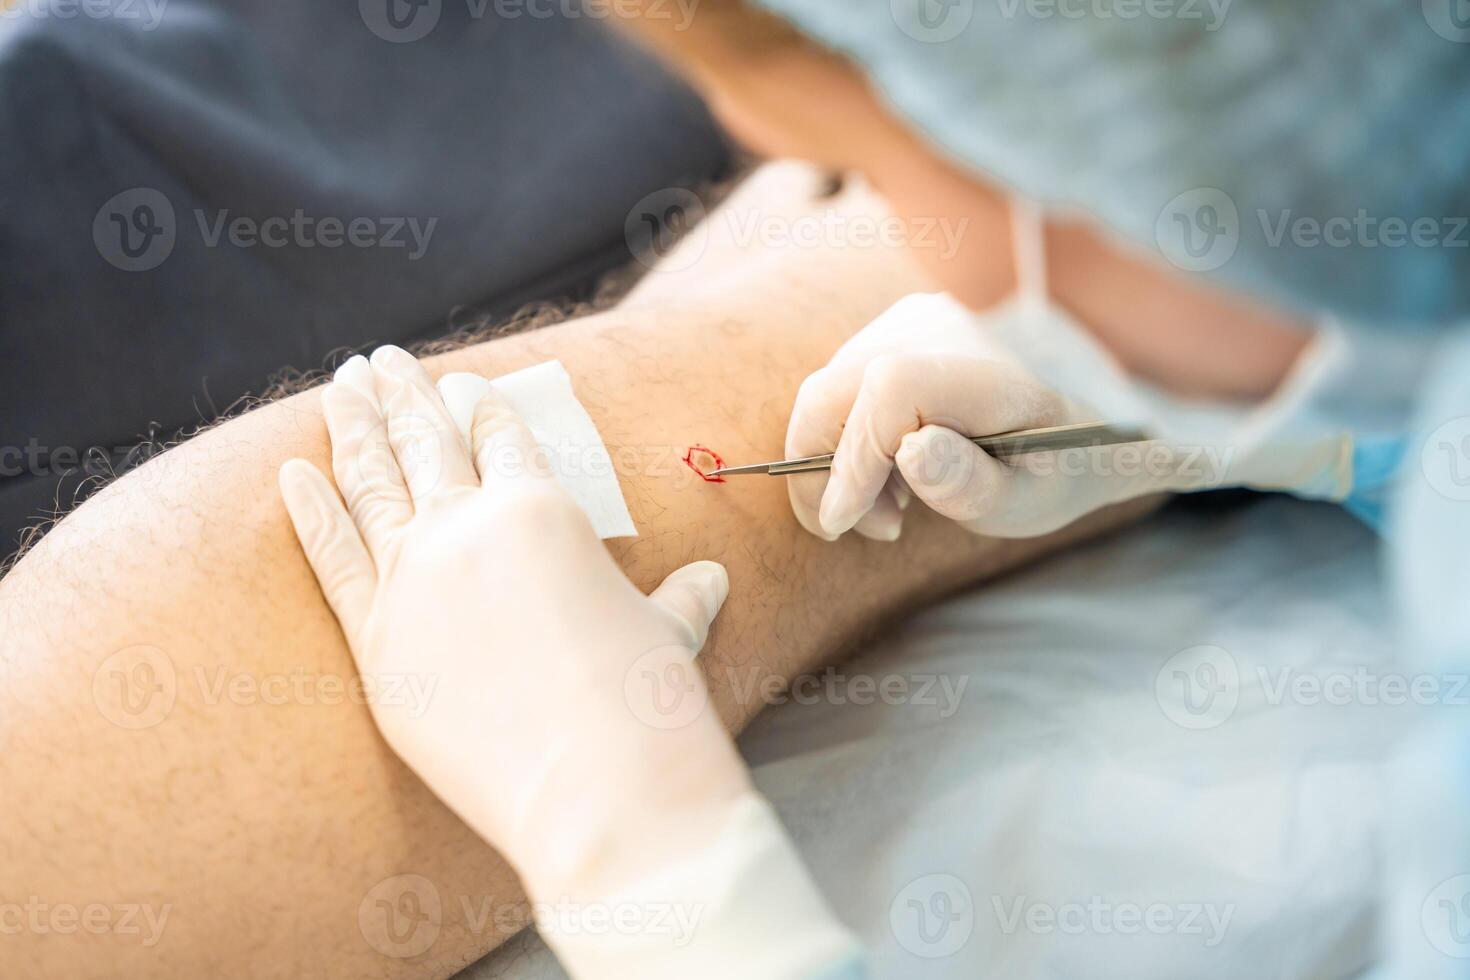 Dermatologist surgeon removes skin diseases with scalpel, operation process photo